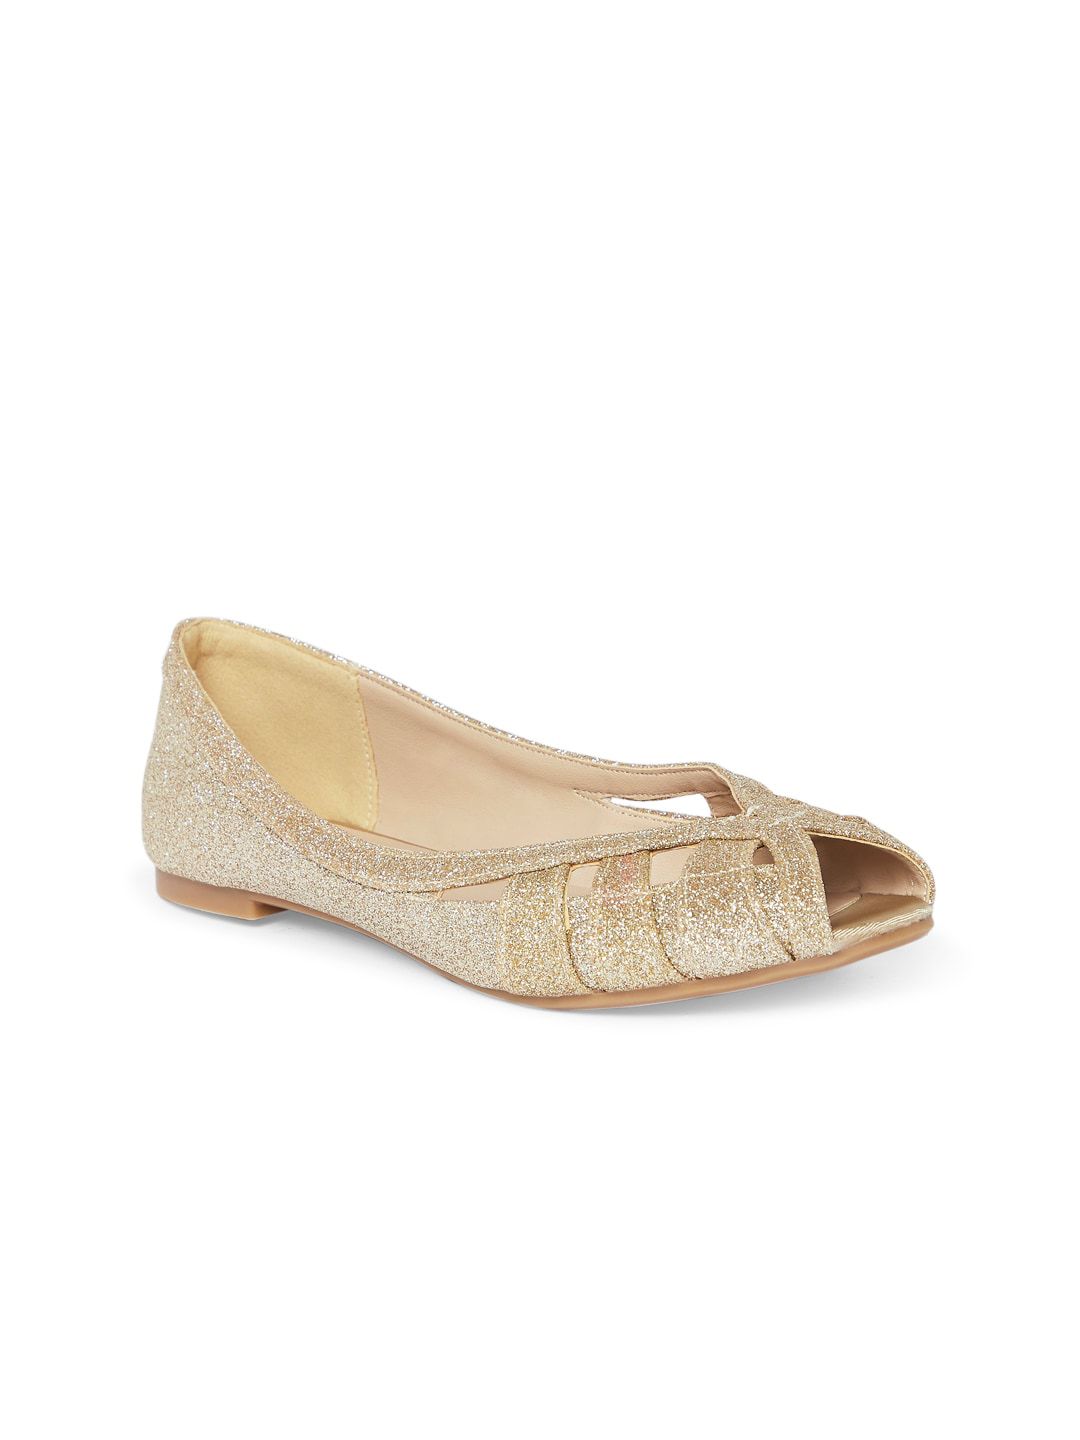 Forever Glam by Pantaloons Women Gold-Toned Embellished Party Ballerinas Flats Price in India